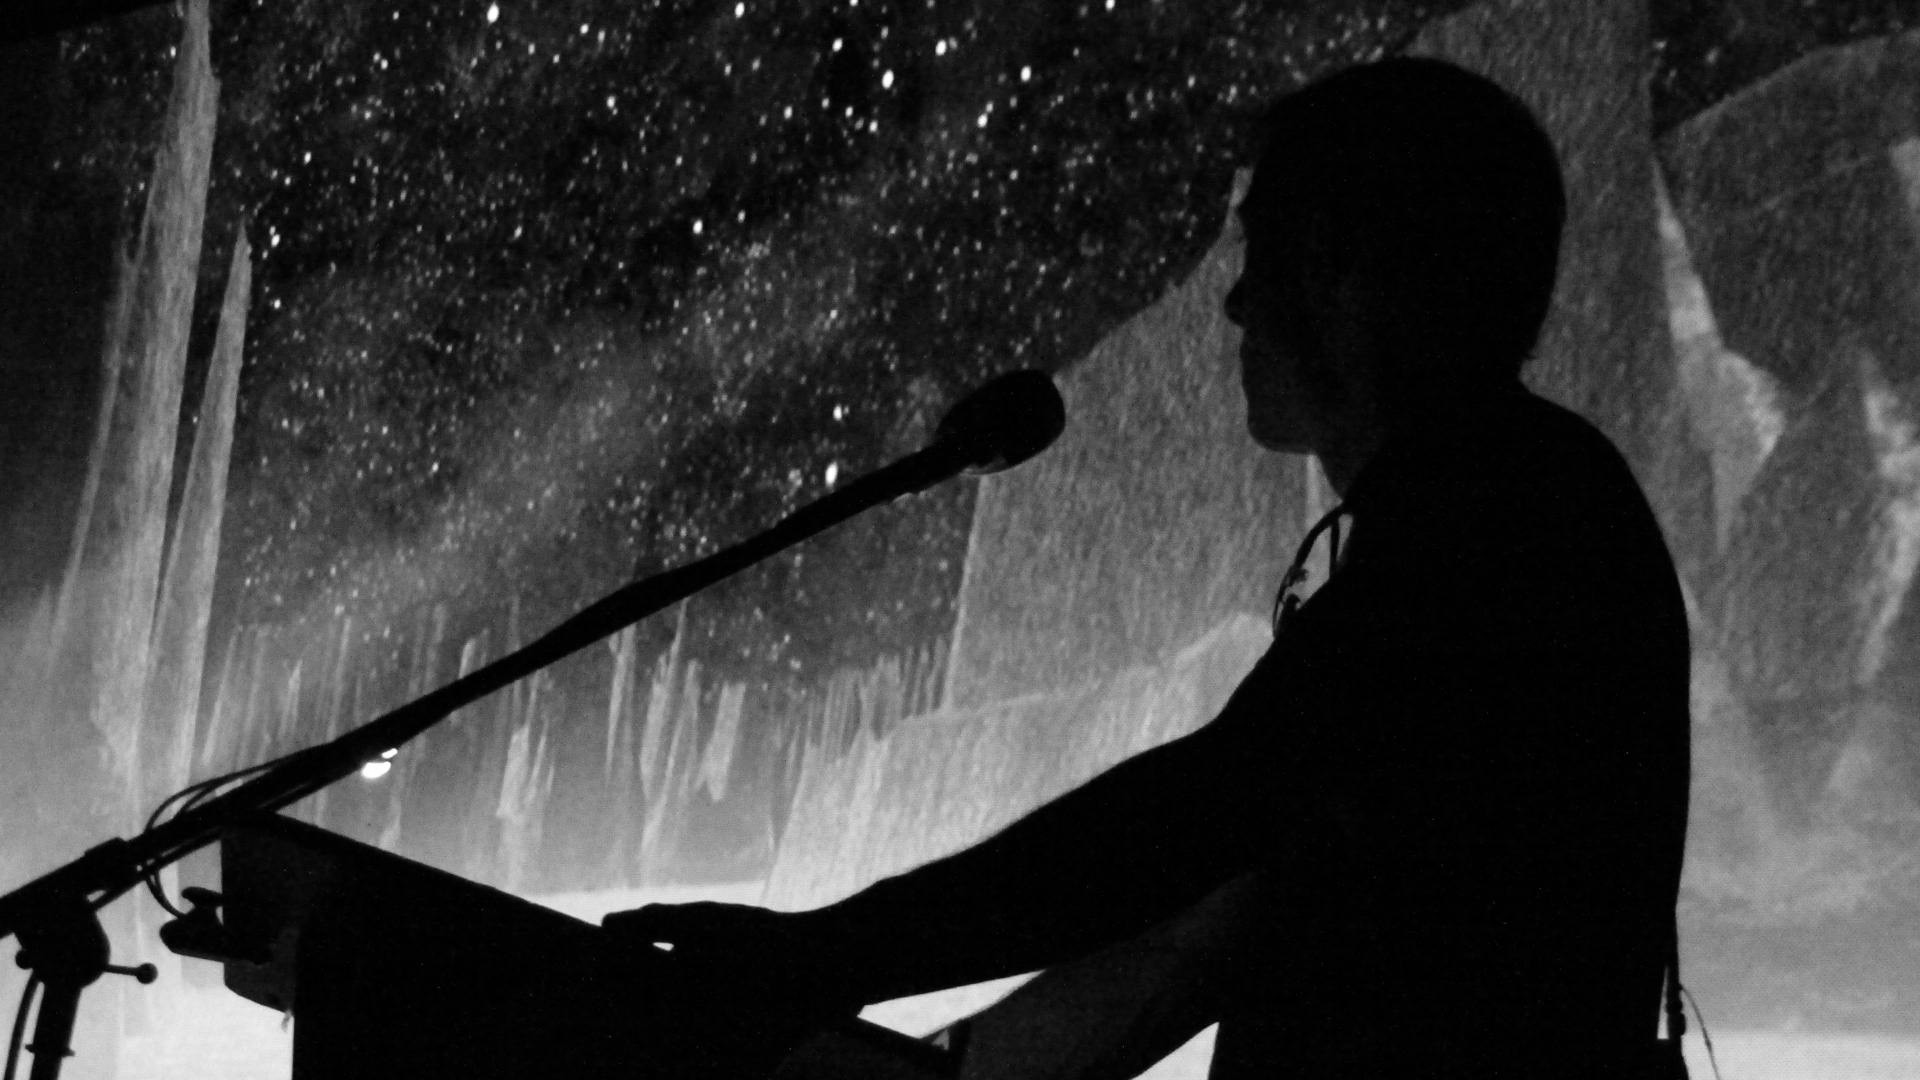 Justin silhouetted against the ice cavern - Cinecenta (Victoria, 2015)